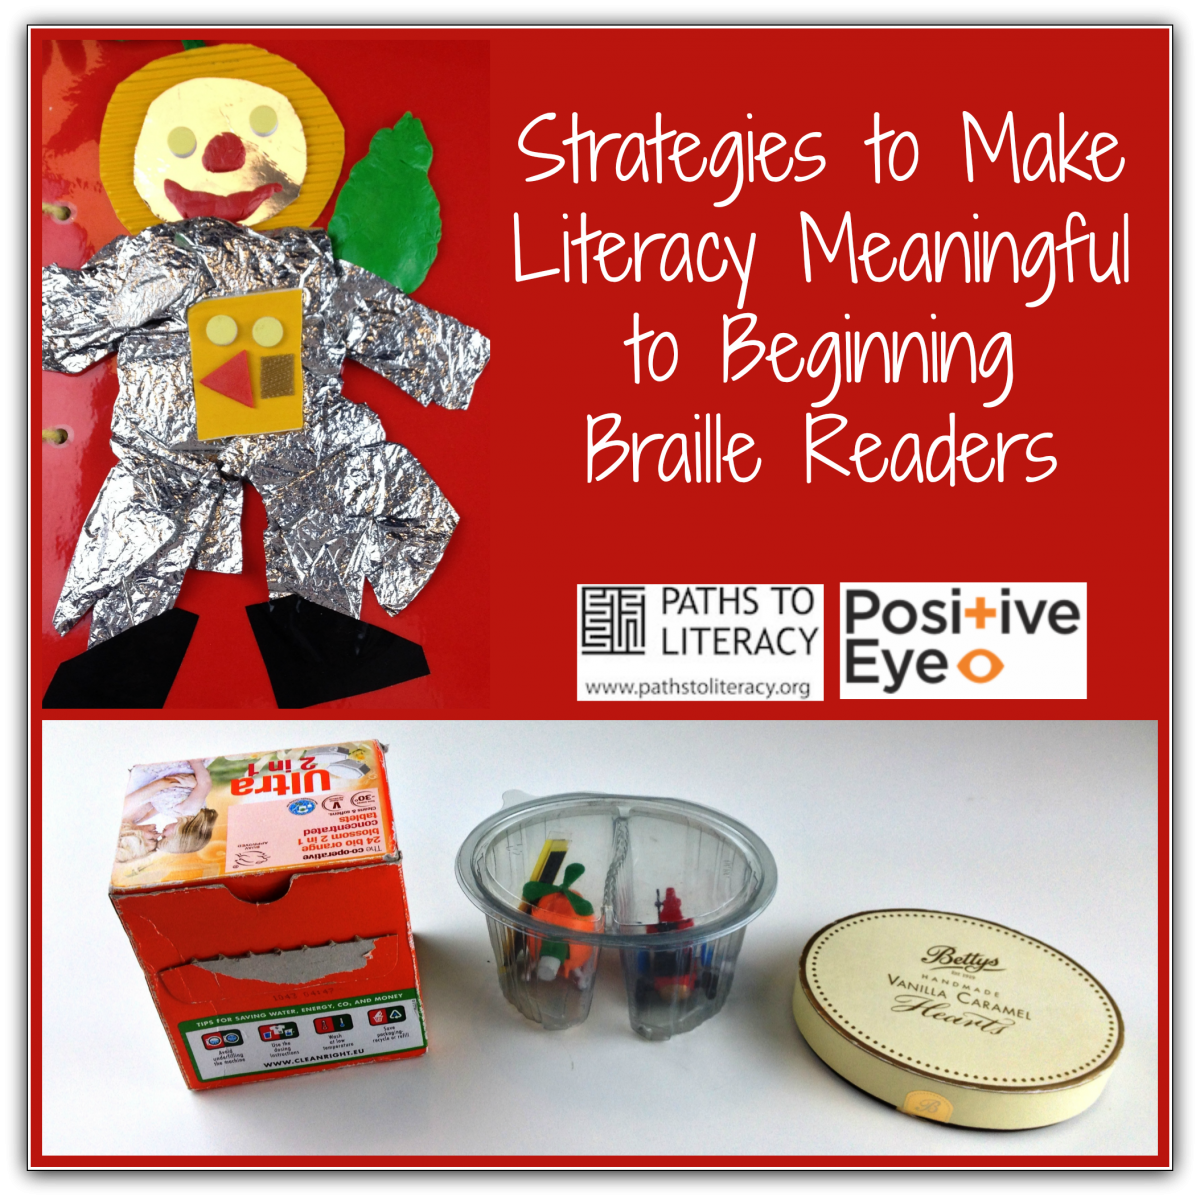 Strategies to Make Literacy Meaningful to Beginning Braille Readers collage